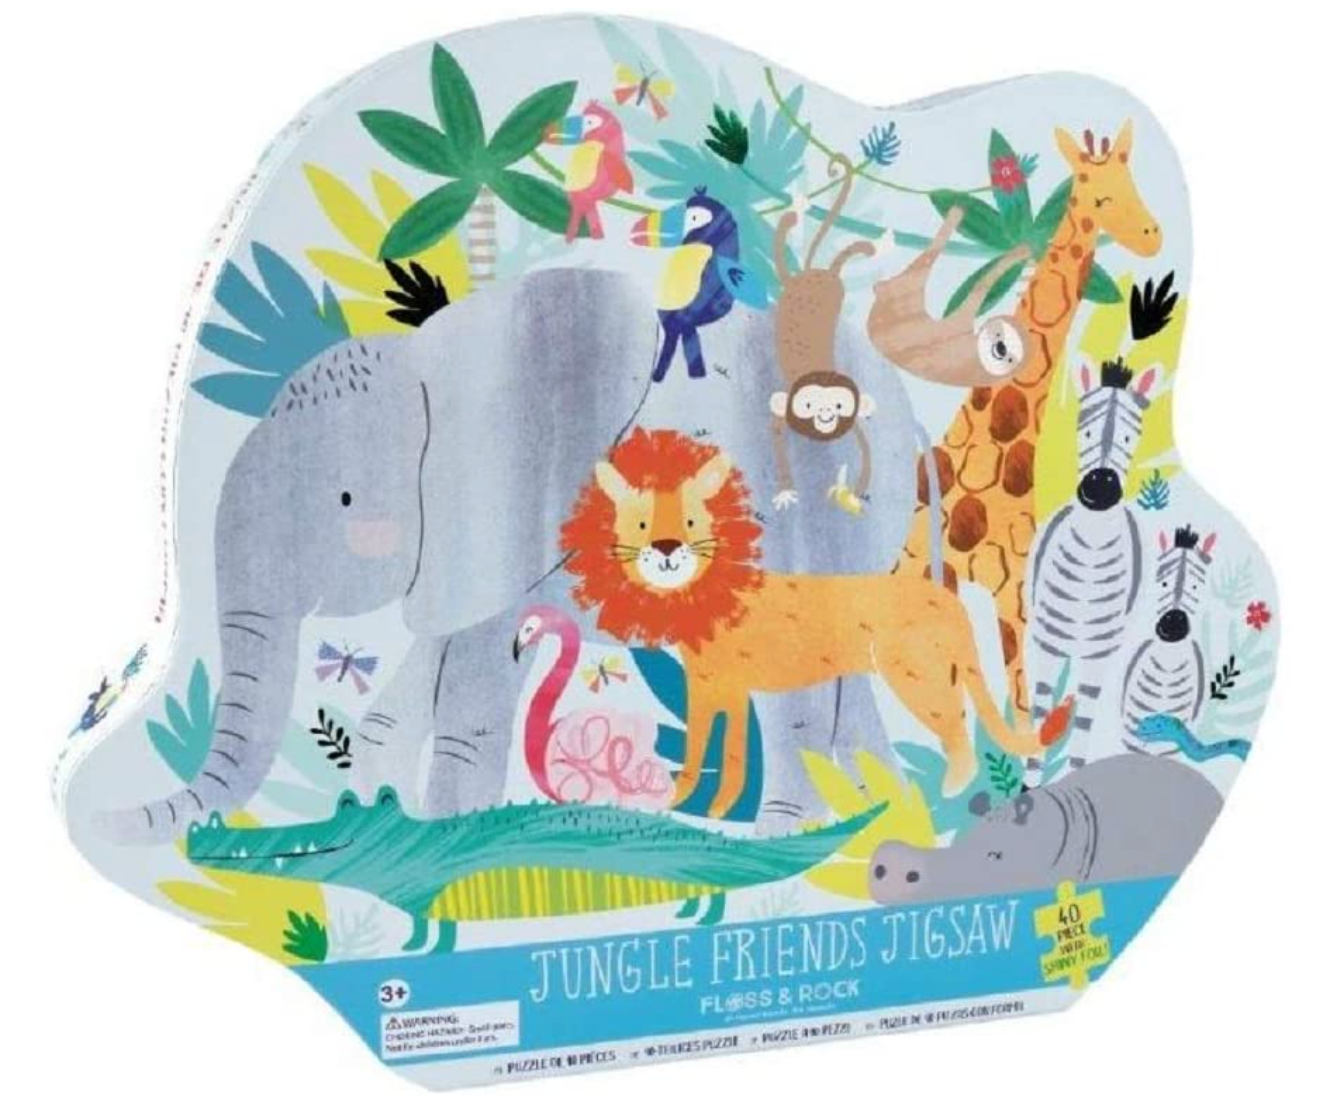 40 piece jungle friends jigsaw puzzle containing images of animals such as zebras, elephants, lions, giraffes, monkeys and more!